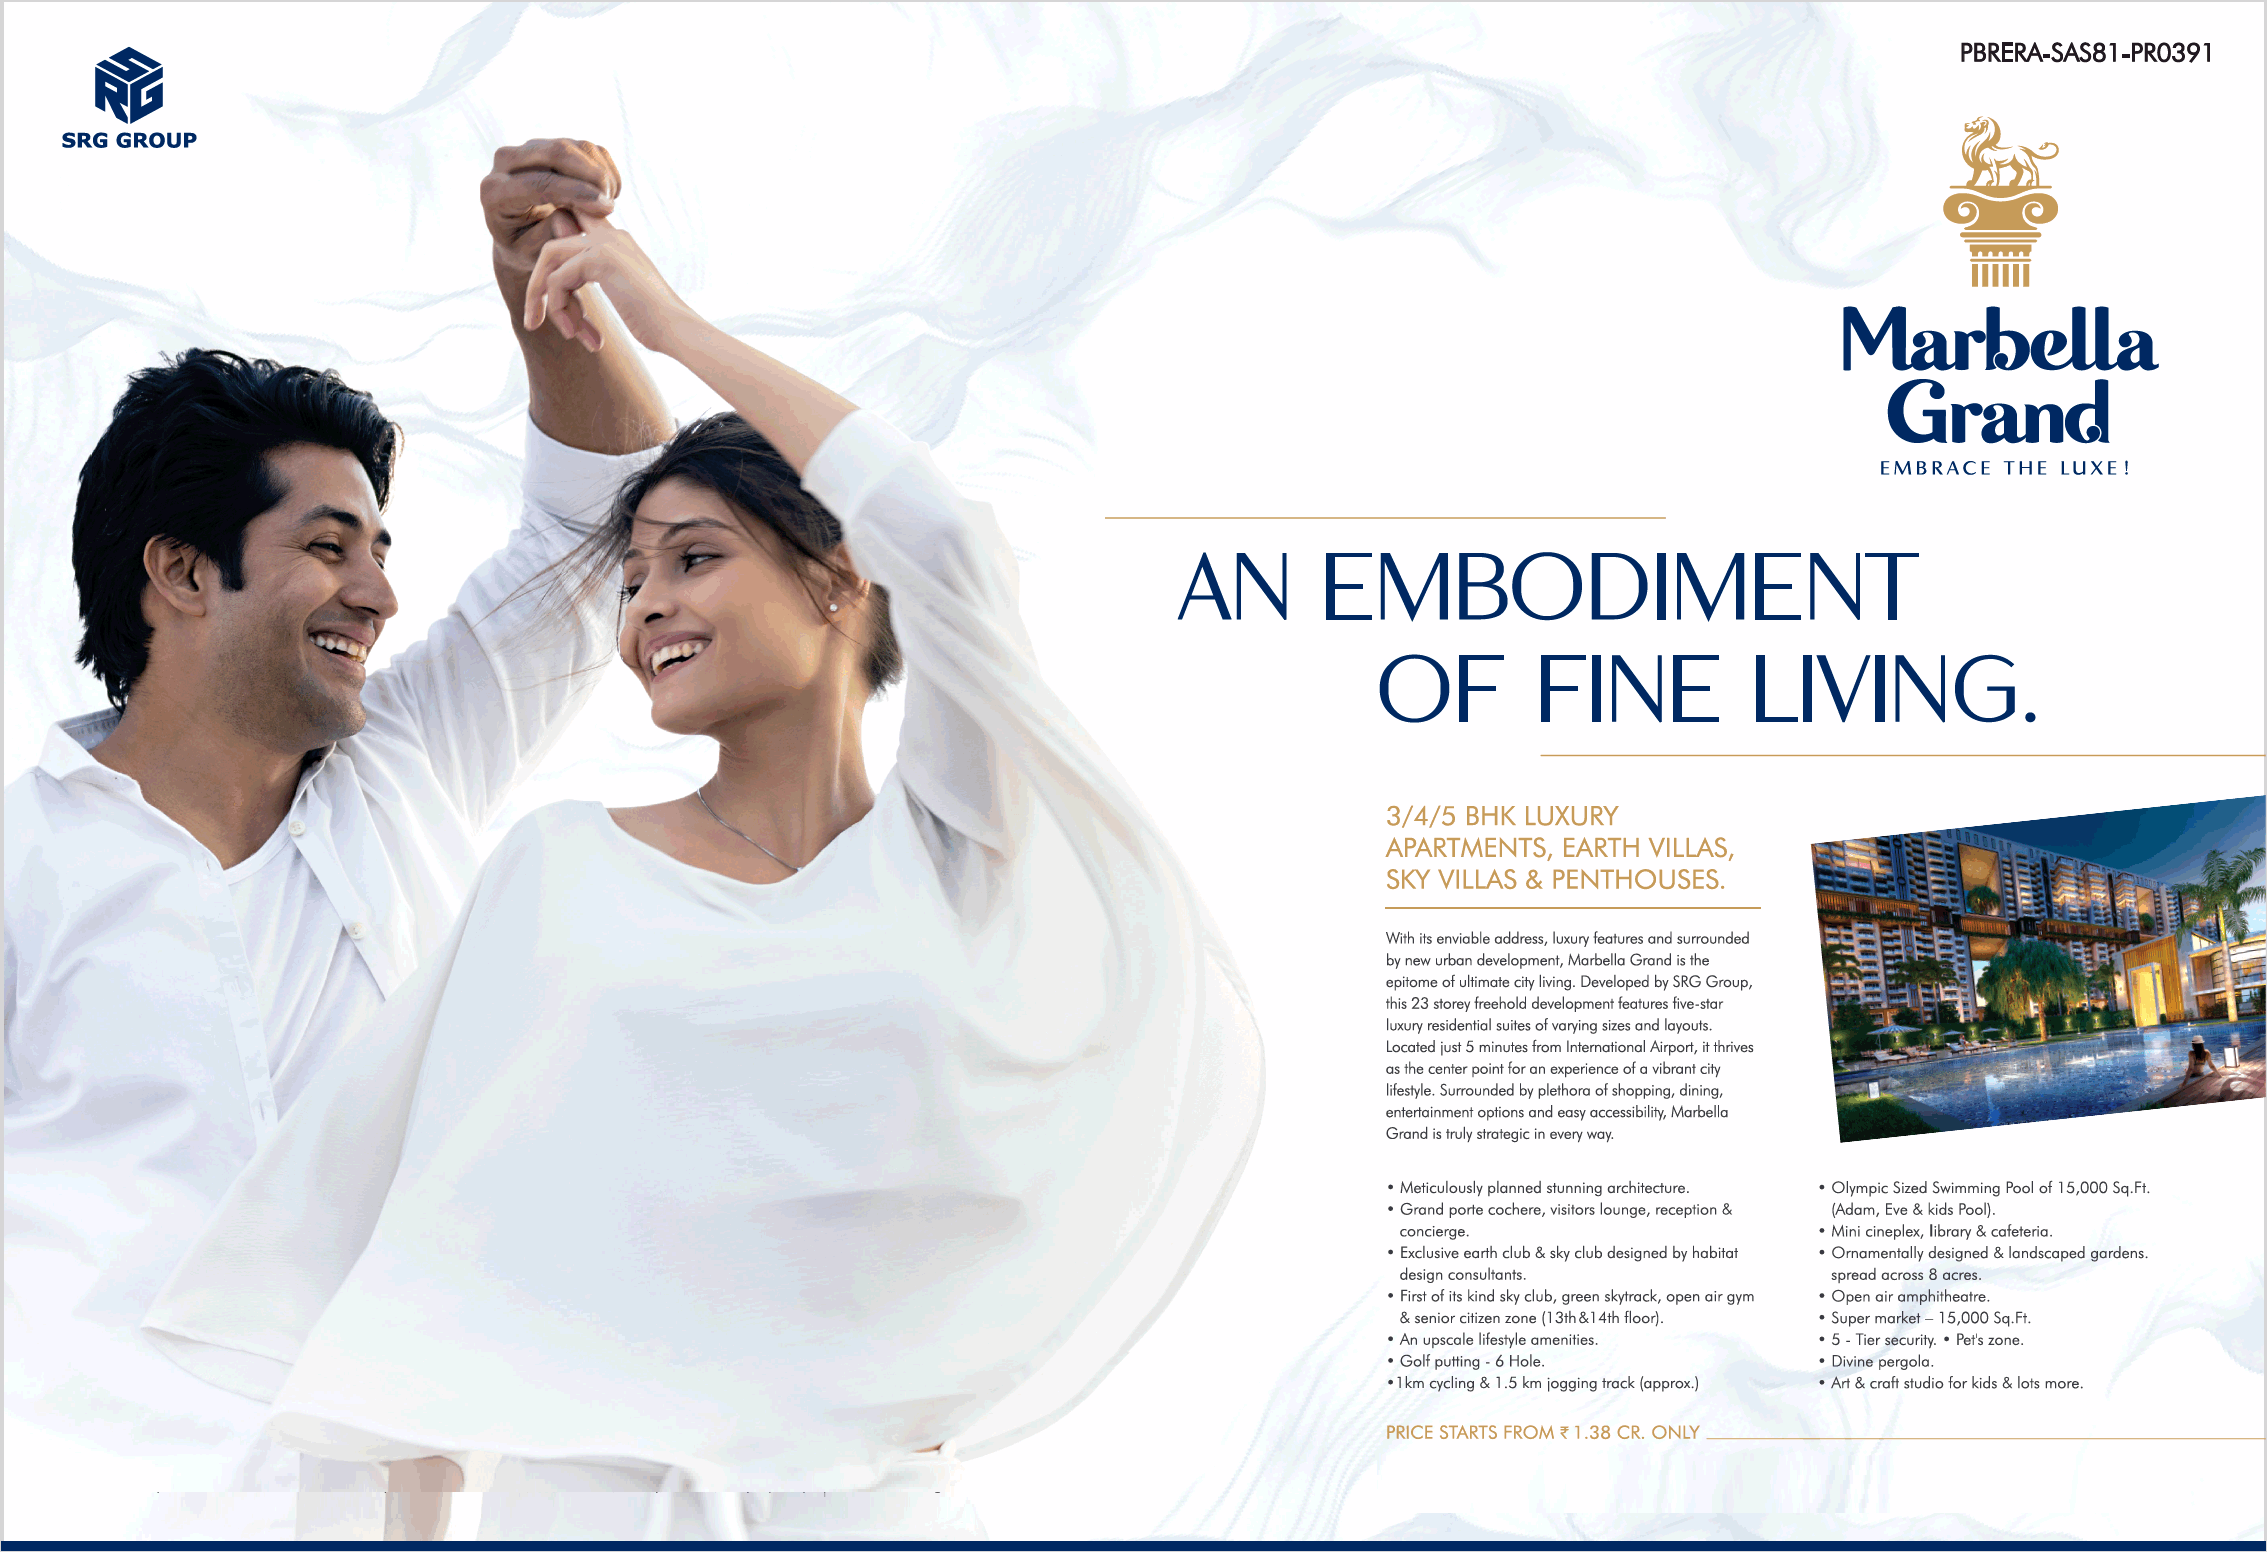 Book an embodiment of fine living at SRG Marbella Grand in Mohali Update